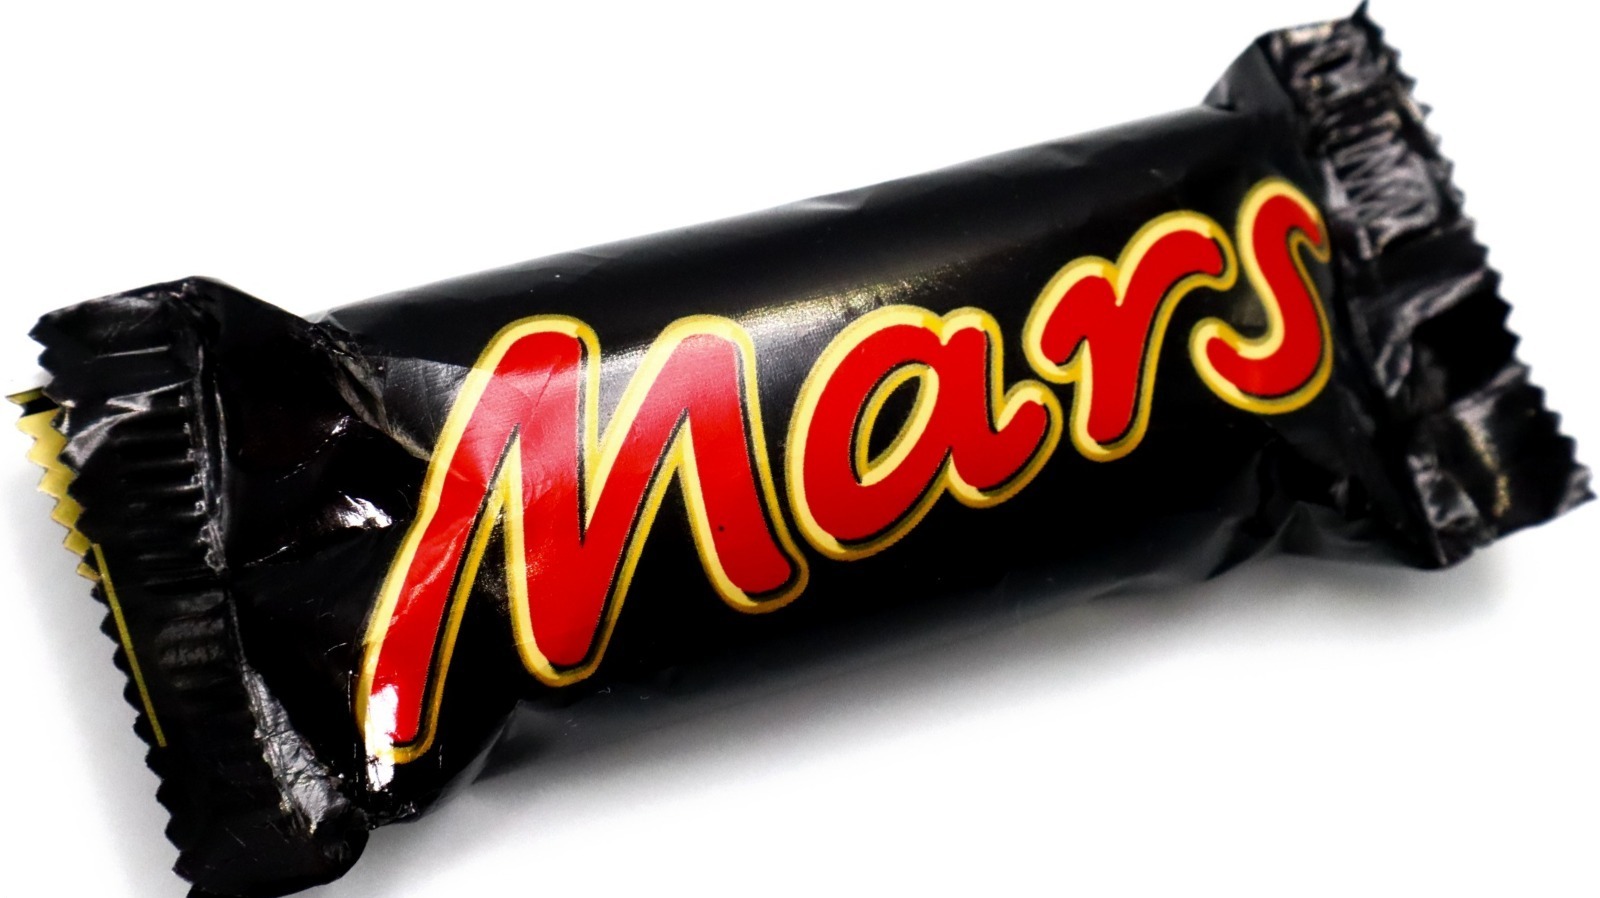 Mars Collaborates With Perfect Day To Launch New Vegan Chocolate Bar